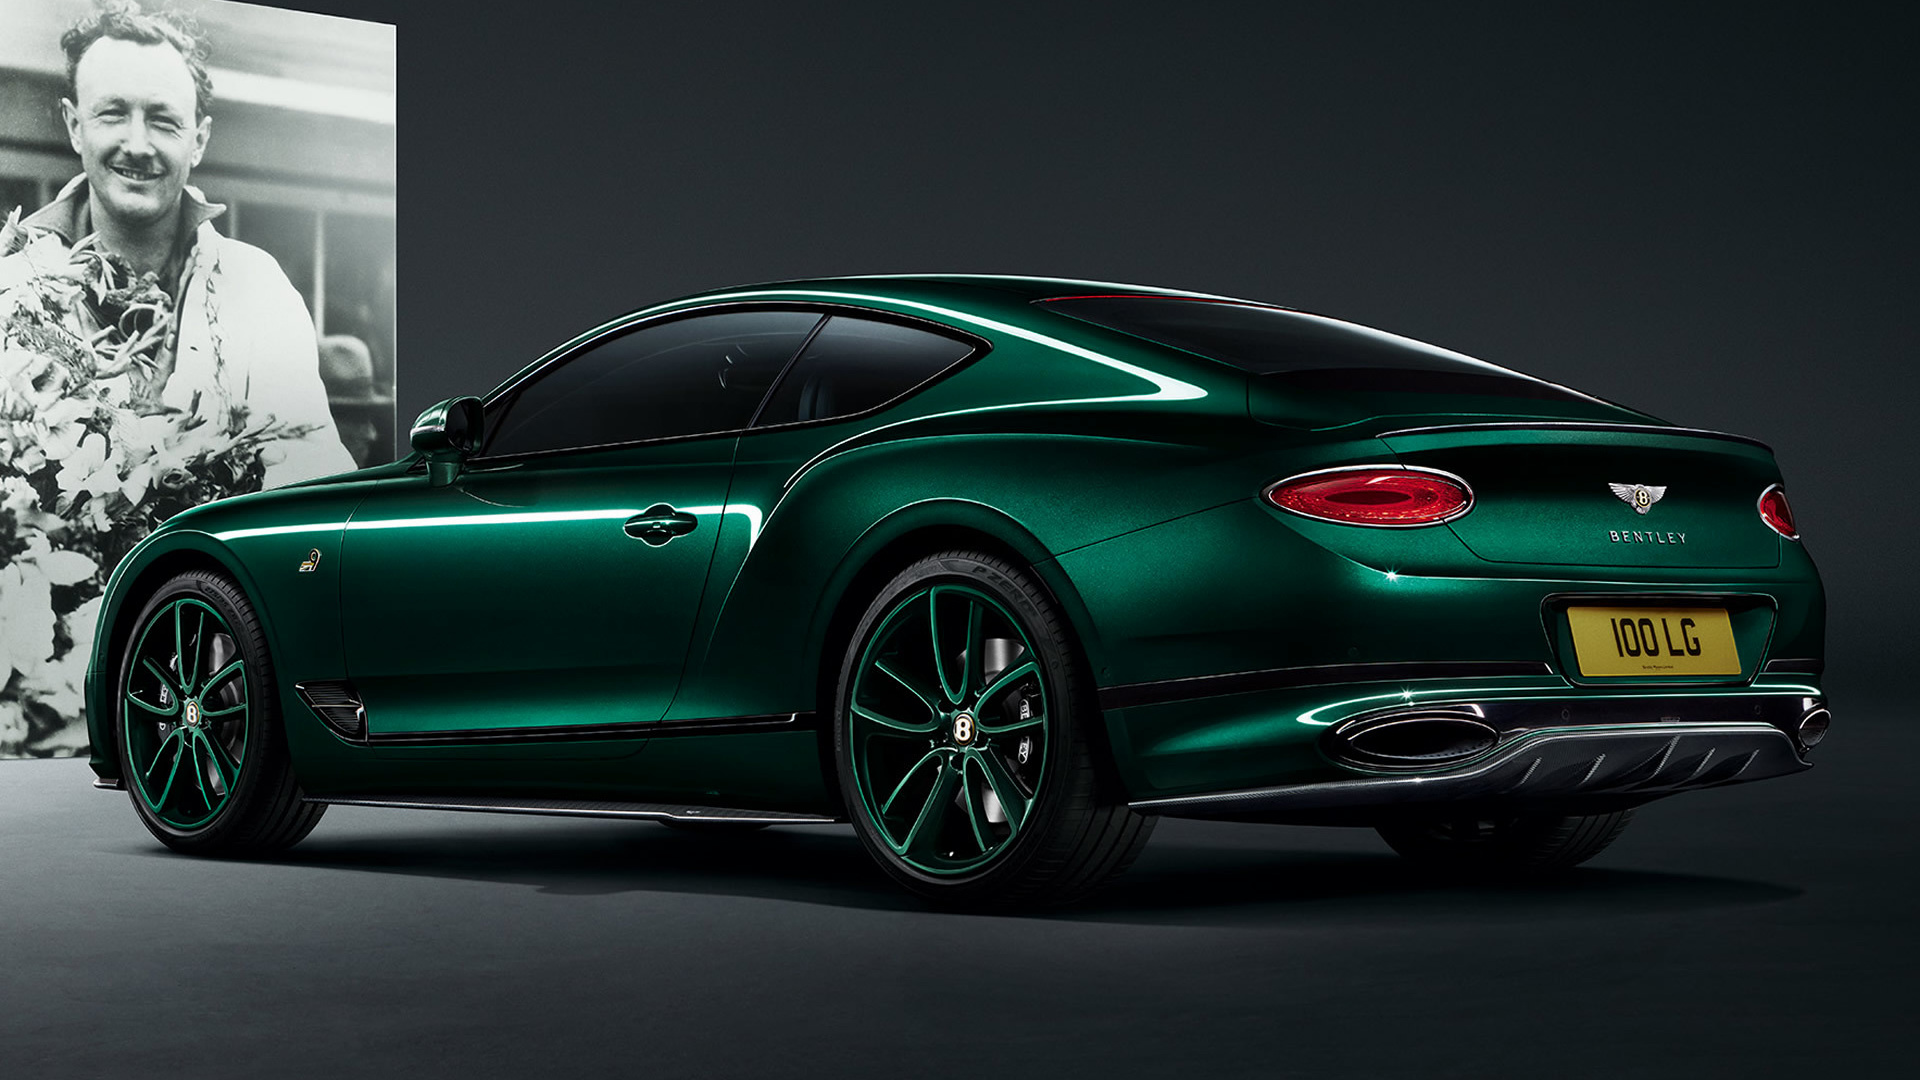 Bentley Continental Gt Number 9 Edition By Mulliner Car Grand Tourer Green Car Luxury Car Sport Car 1920x1080